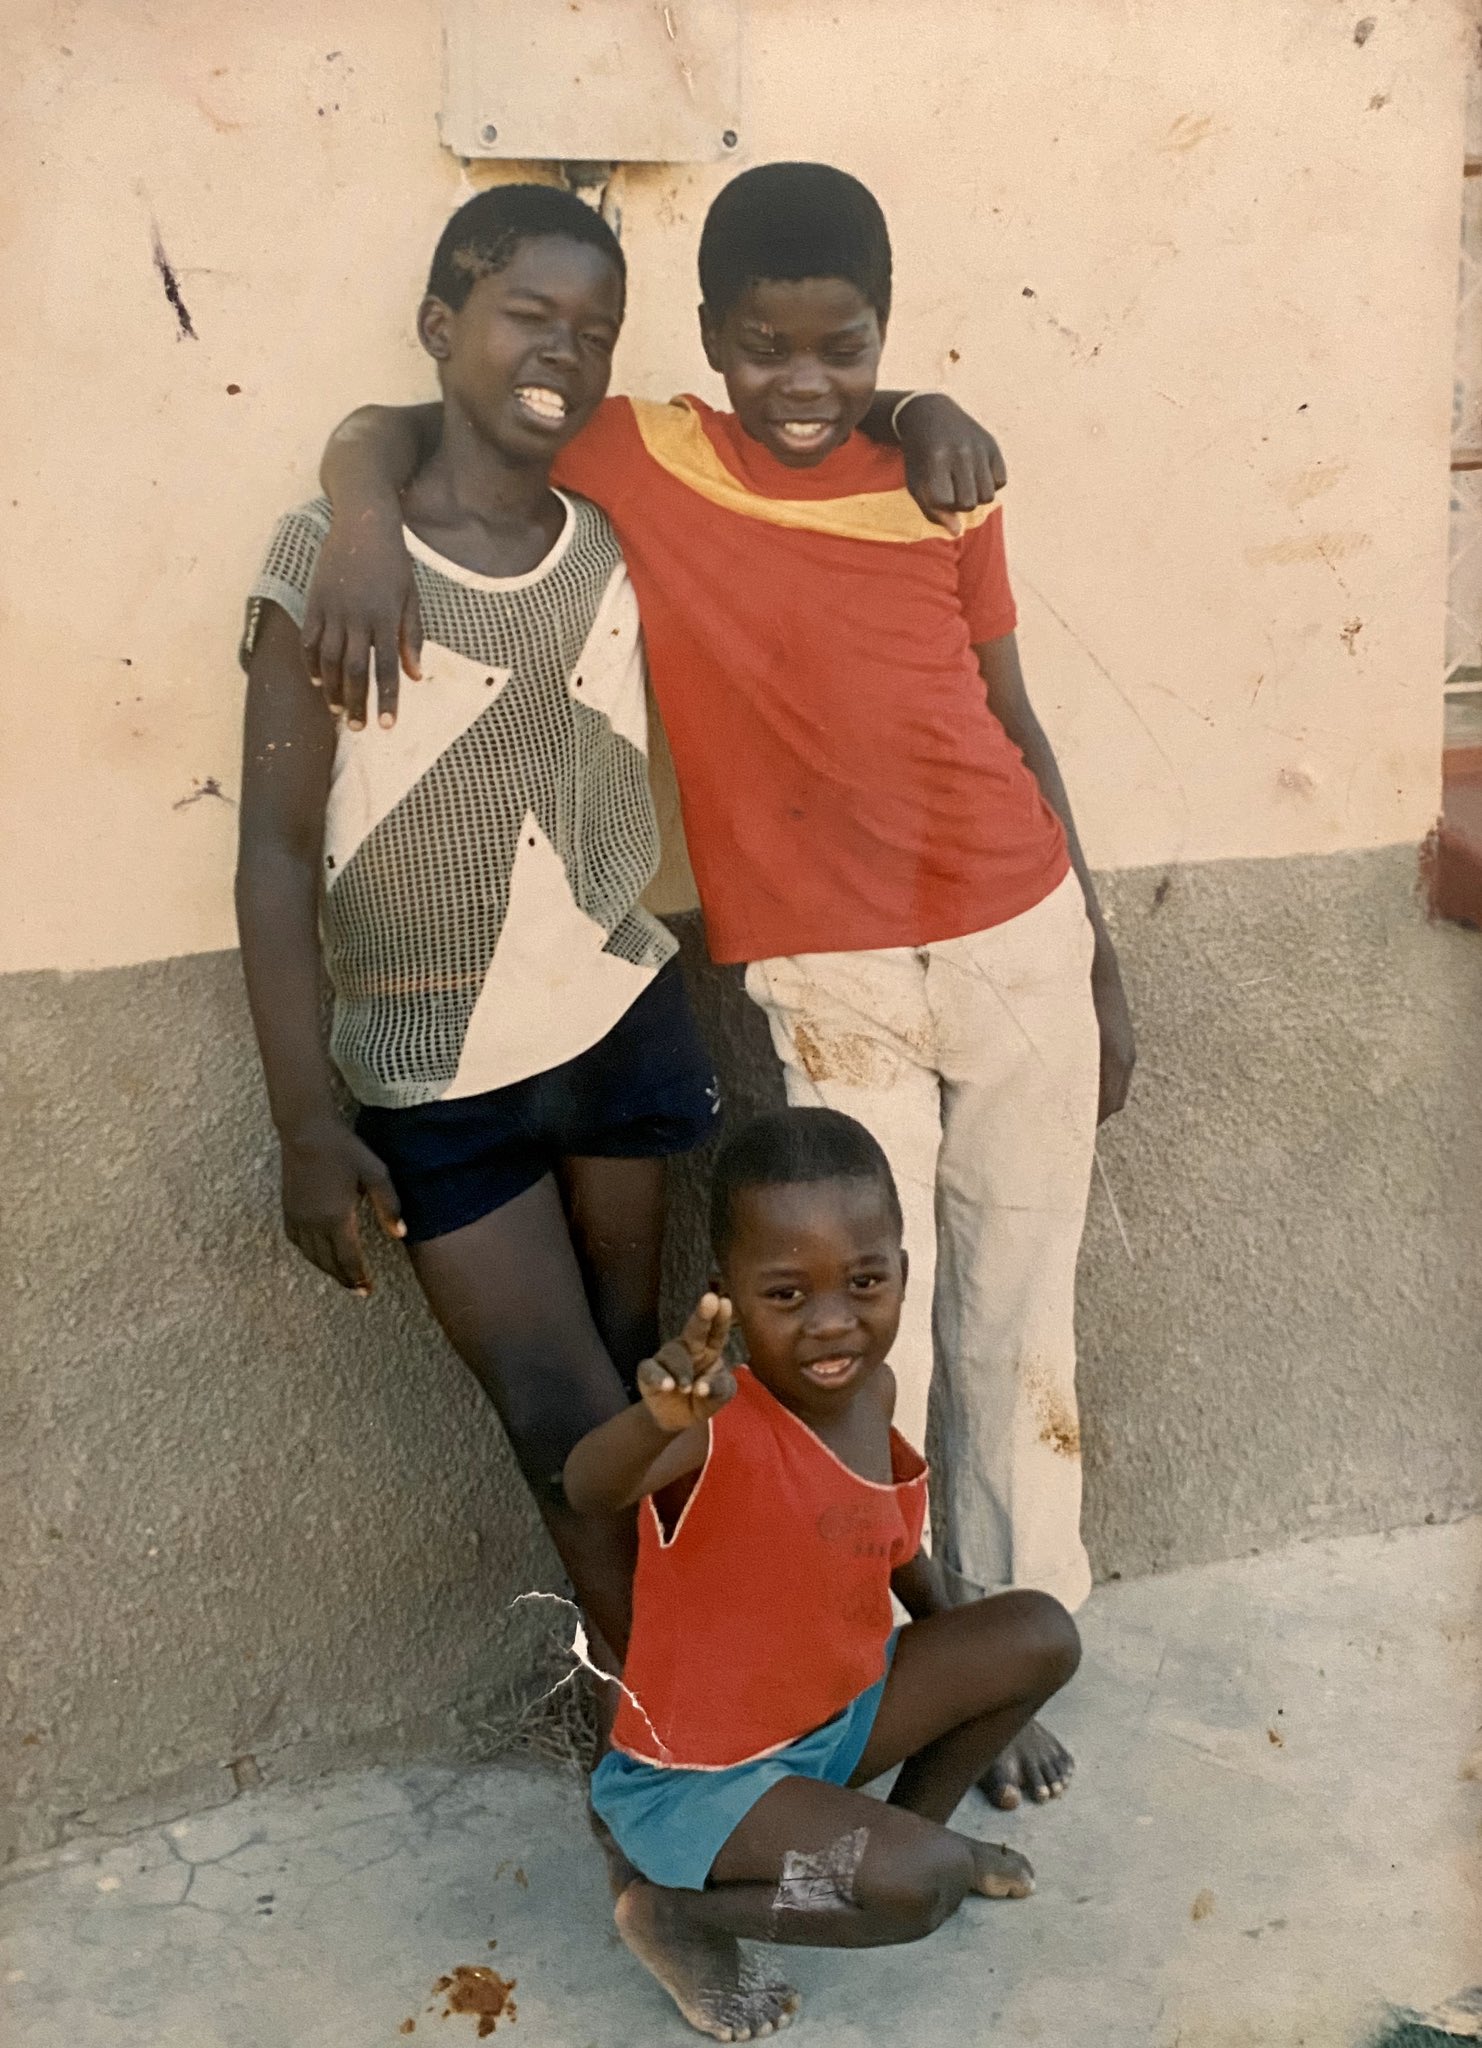 Throwback Pics: See How Money Has Transformed These DJs Who Are Unashamed Of Their Roots